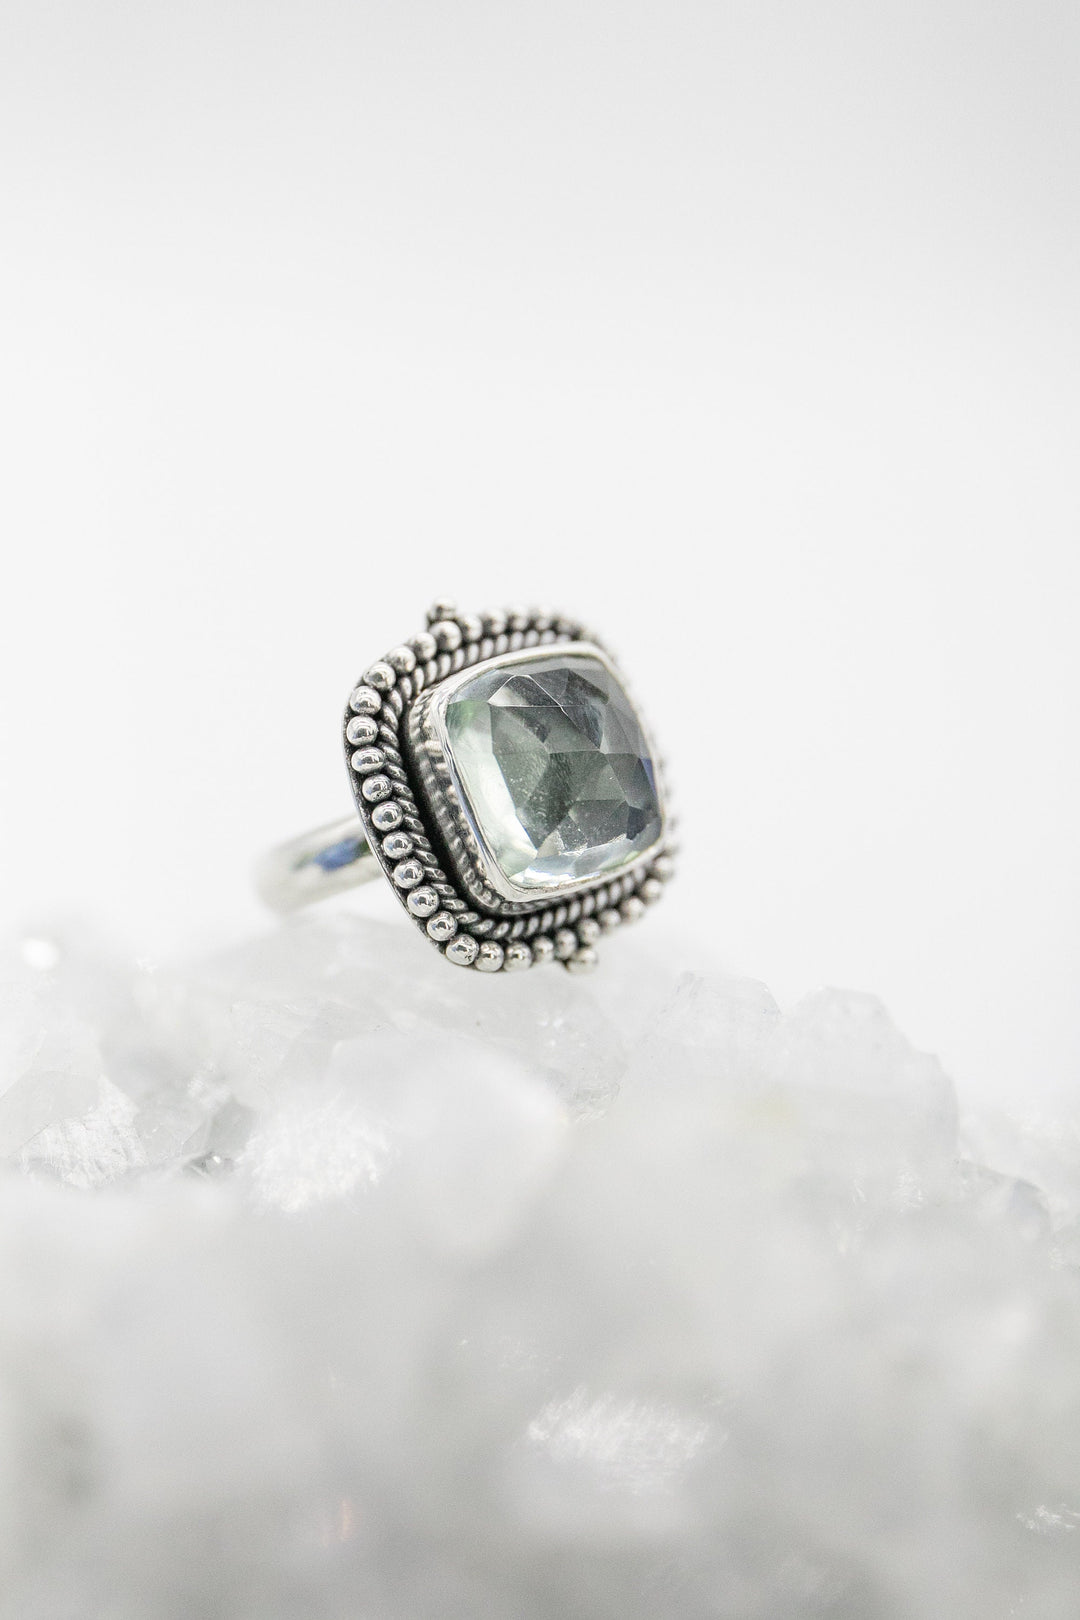 Faceted Green Amethyst or Prasiolite Ring with Tribal Sterling Silver Setting - Size 6 US